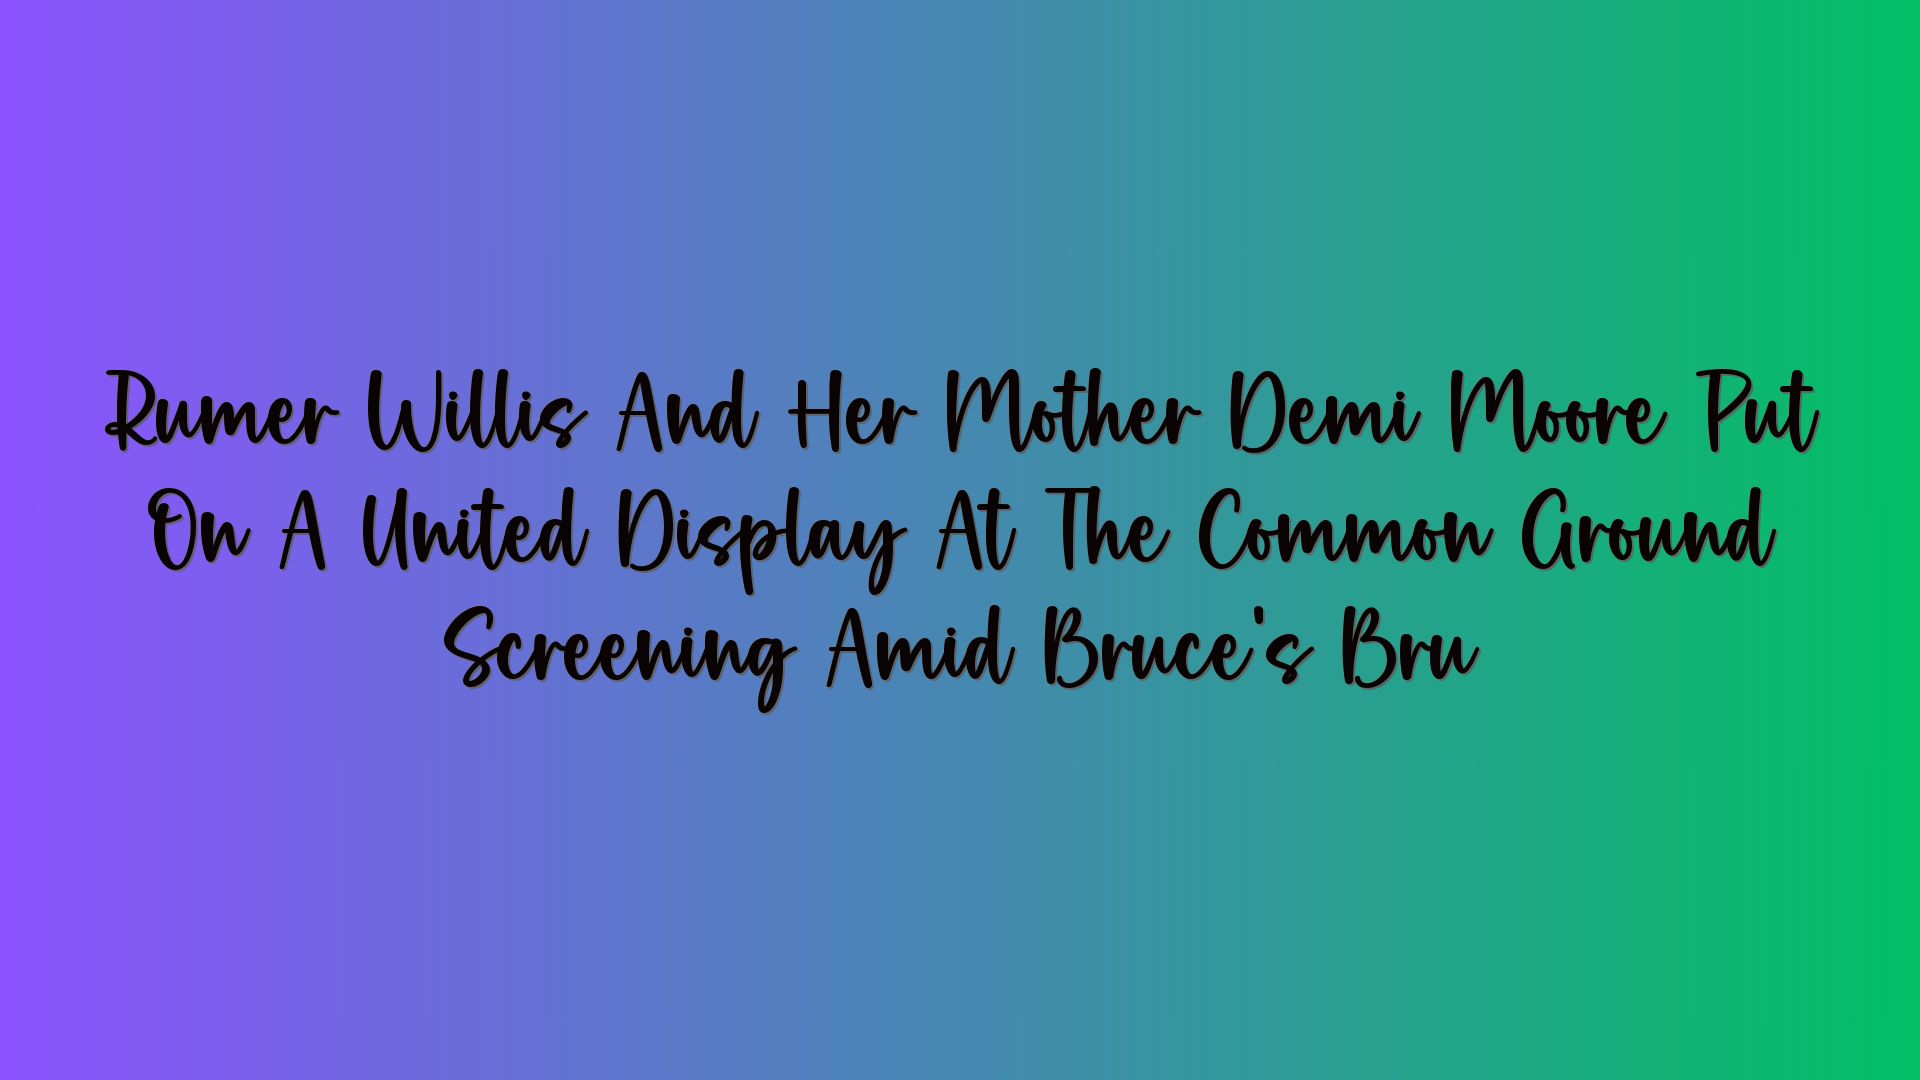 Rumer Willis And Her Mother Demi Moore Put On A United Display At The Common Ground Screening Amid Bruce’s Bru